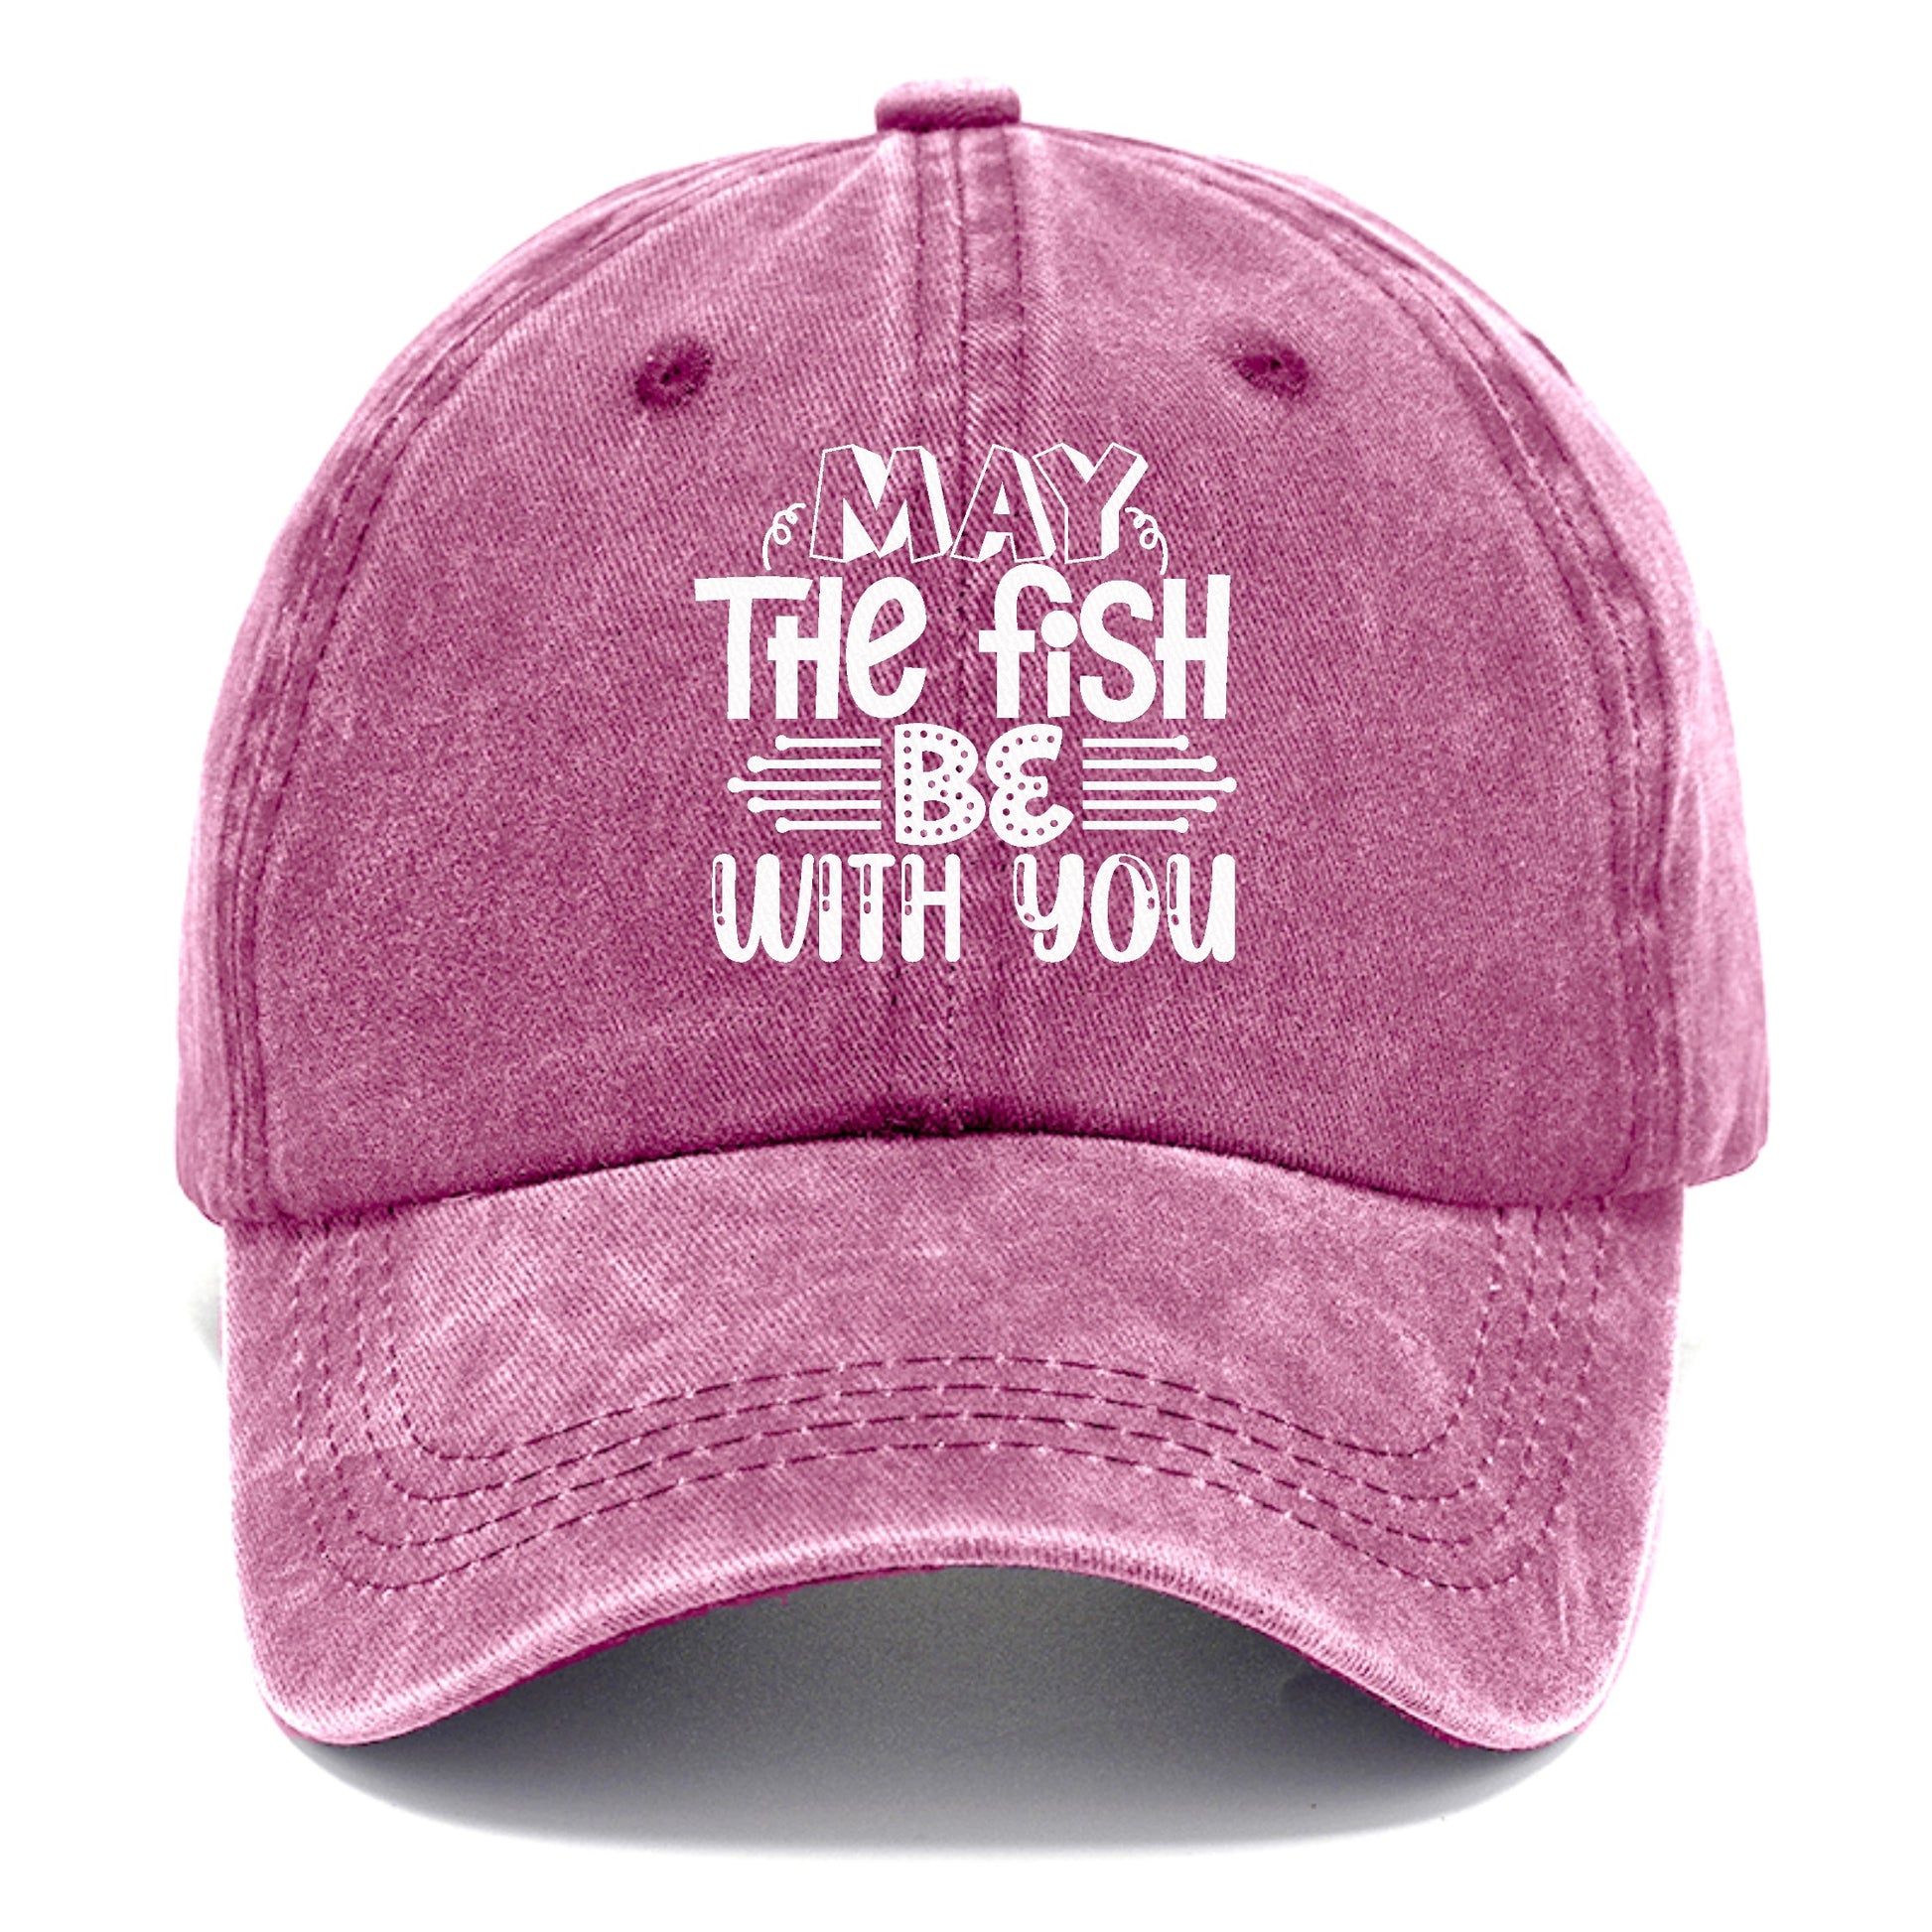 may the fish be with you Hat